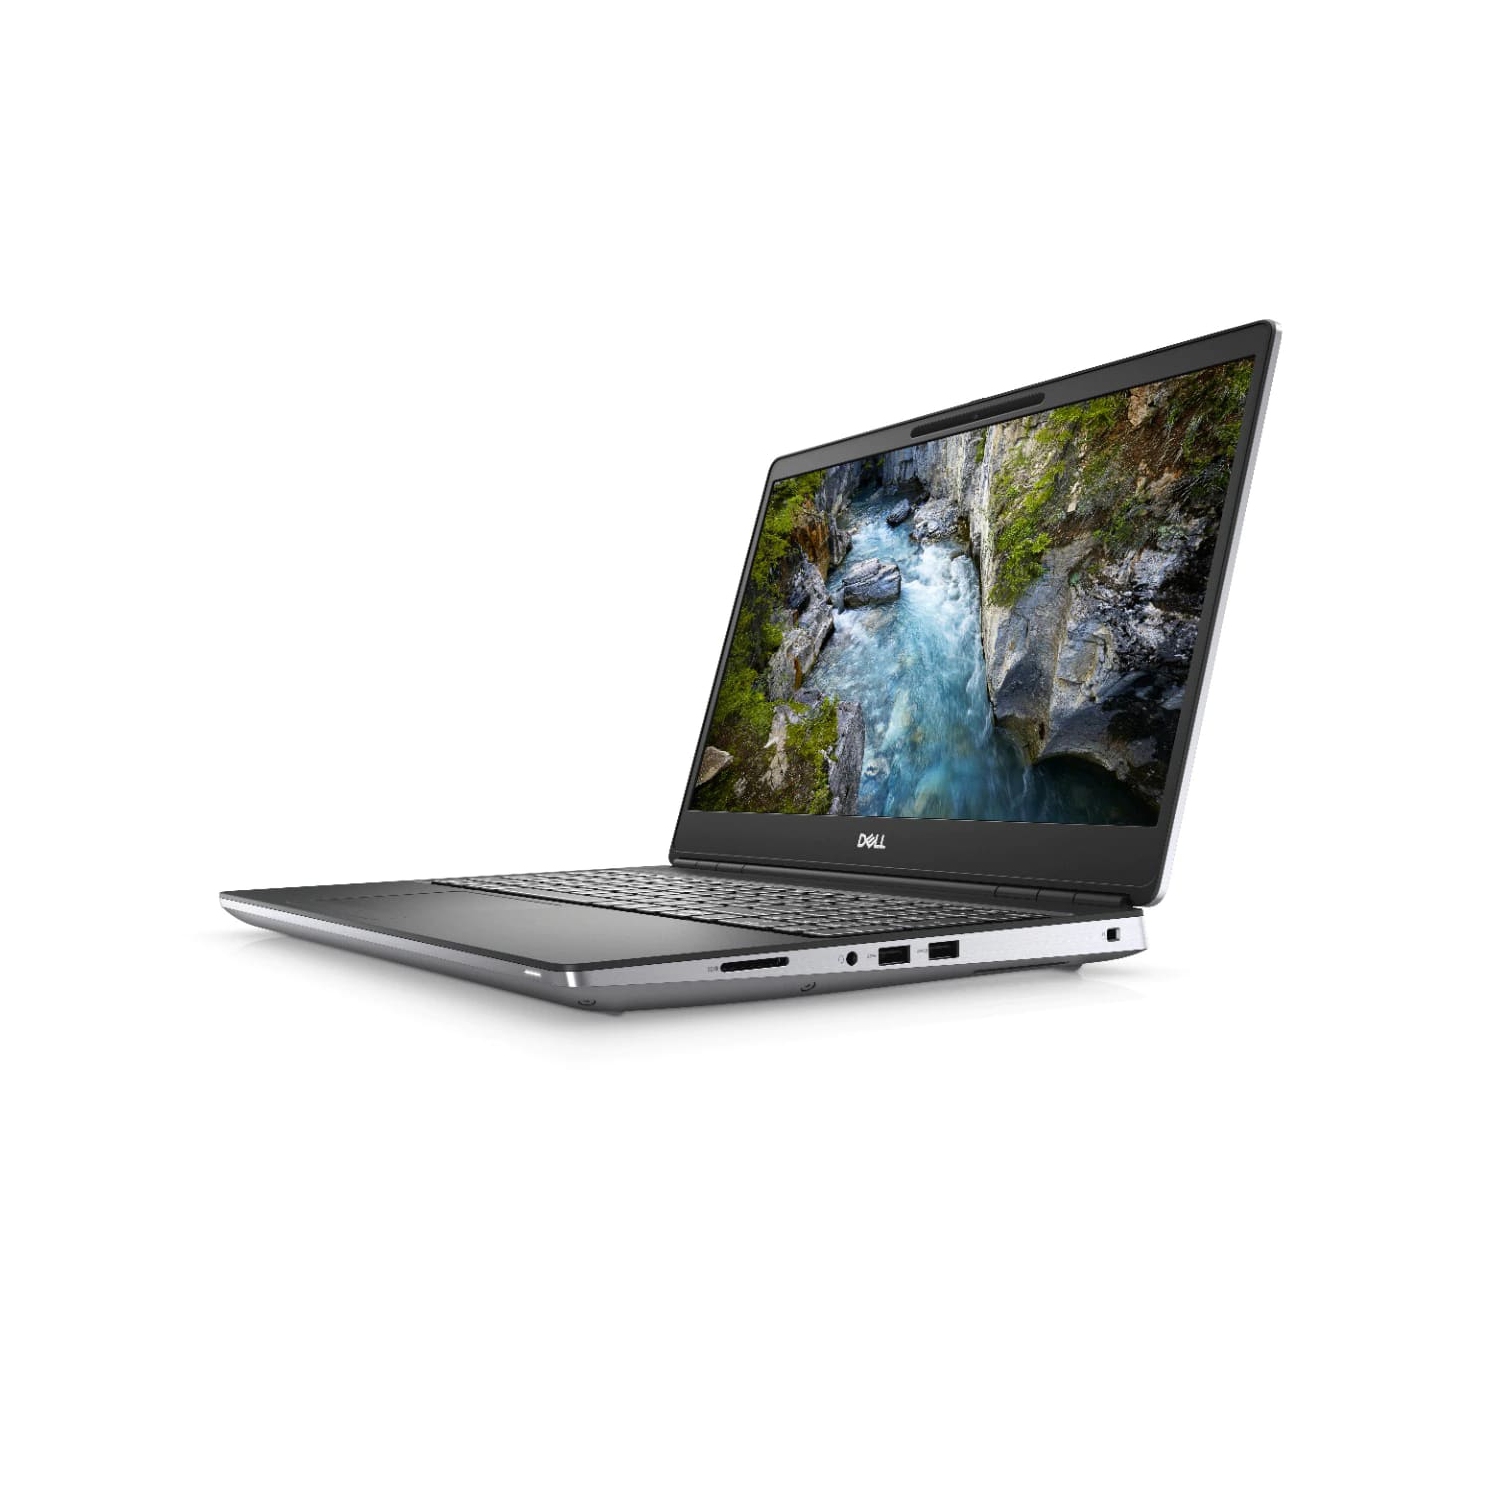 Refurbished (Excellent) - Dell Precision 7000 7550 Workstation Laptop (2020), 15.6" FHD, Core i9, 512GB SSD + 256GB SSD, 32GB RAM, RTX 5000, 5.3 GHz, 10th Gen CPU